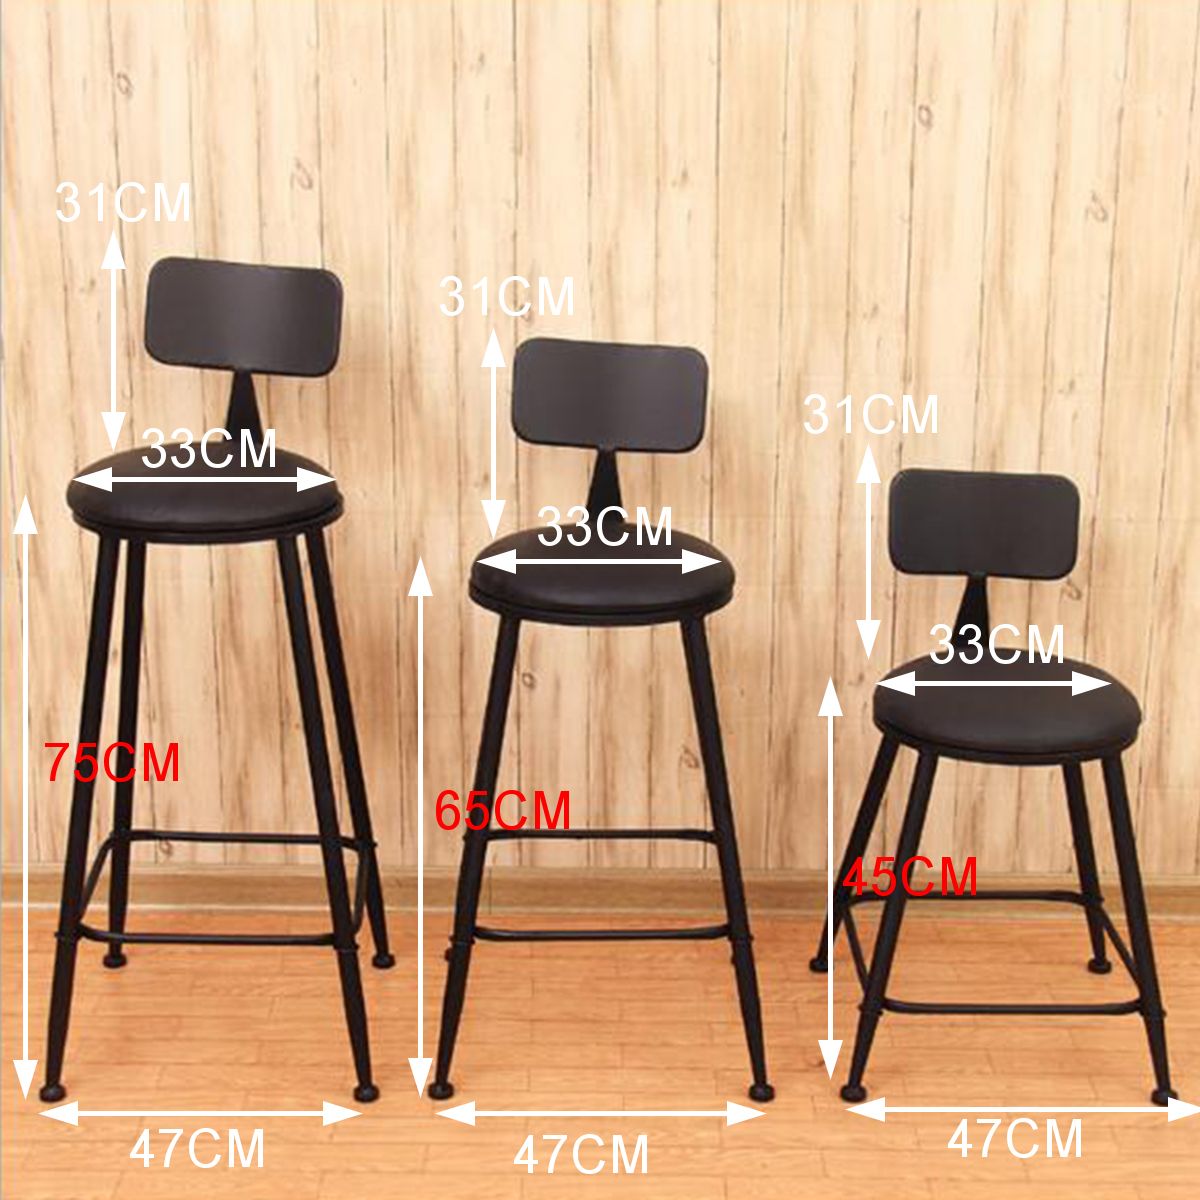 756545cm-Industrial-Rustic-Retro-Metal-Bar-Stool-Leather-Back-Counter-Chair-Decorations-1336327